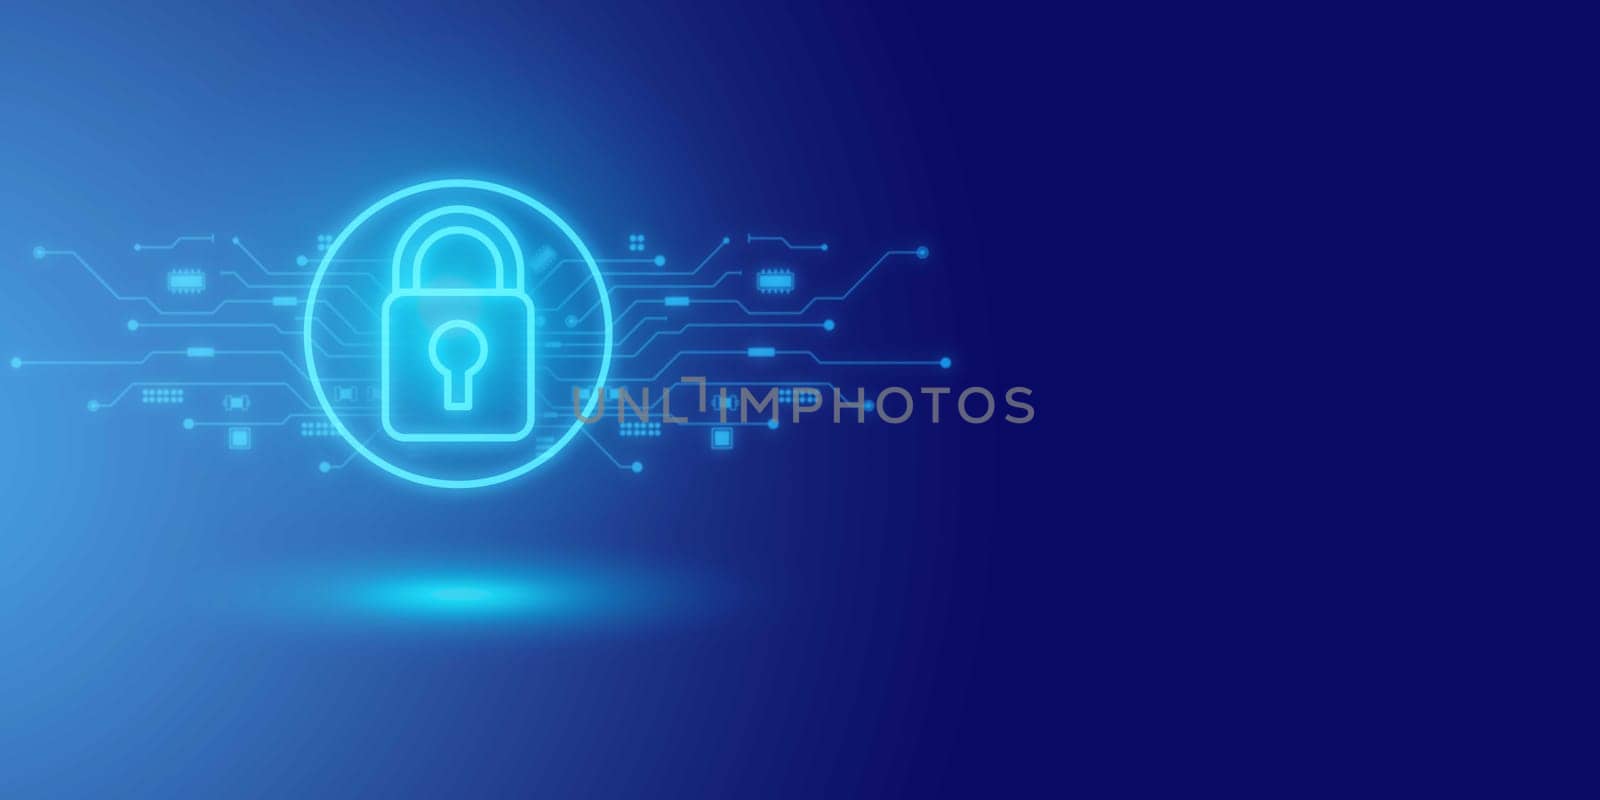 Futuristic blue shield ethics and Security abstract technology background. Artificial intelligence digital transformation and Business quantum internet network communication and Antivirus.